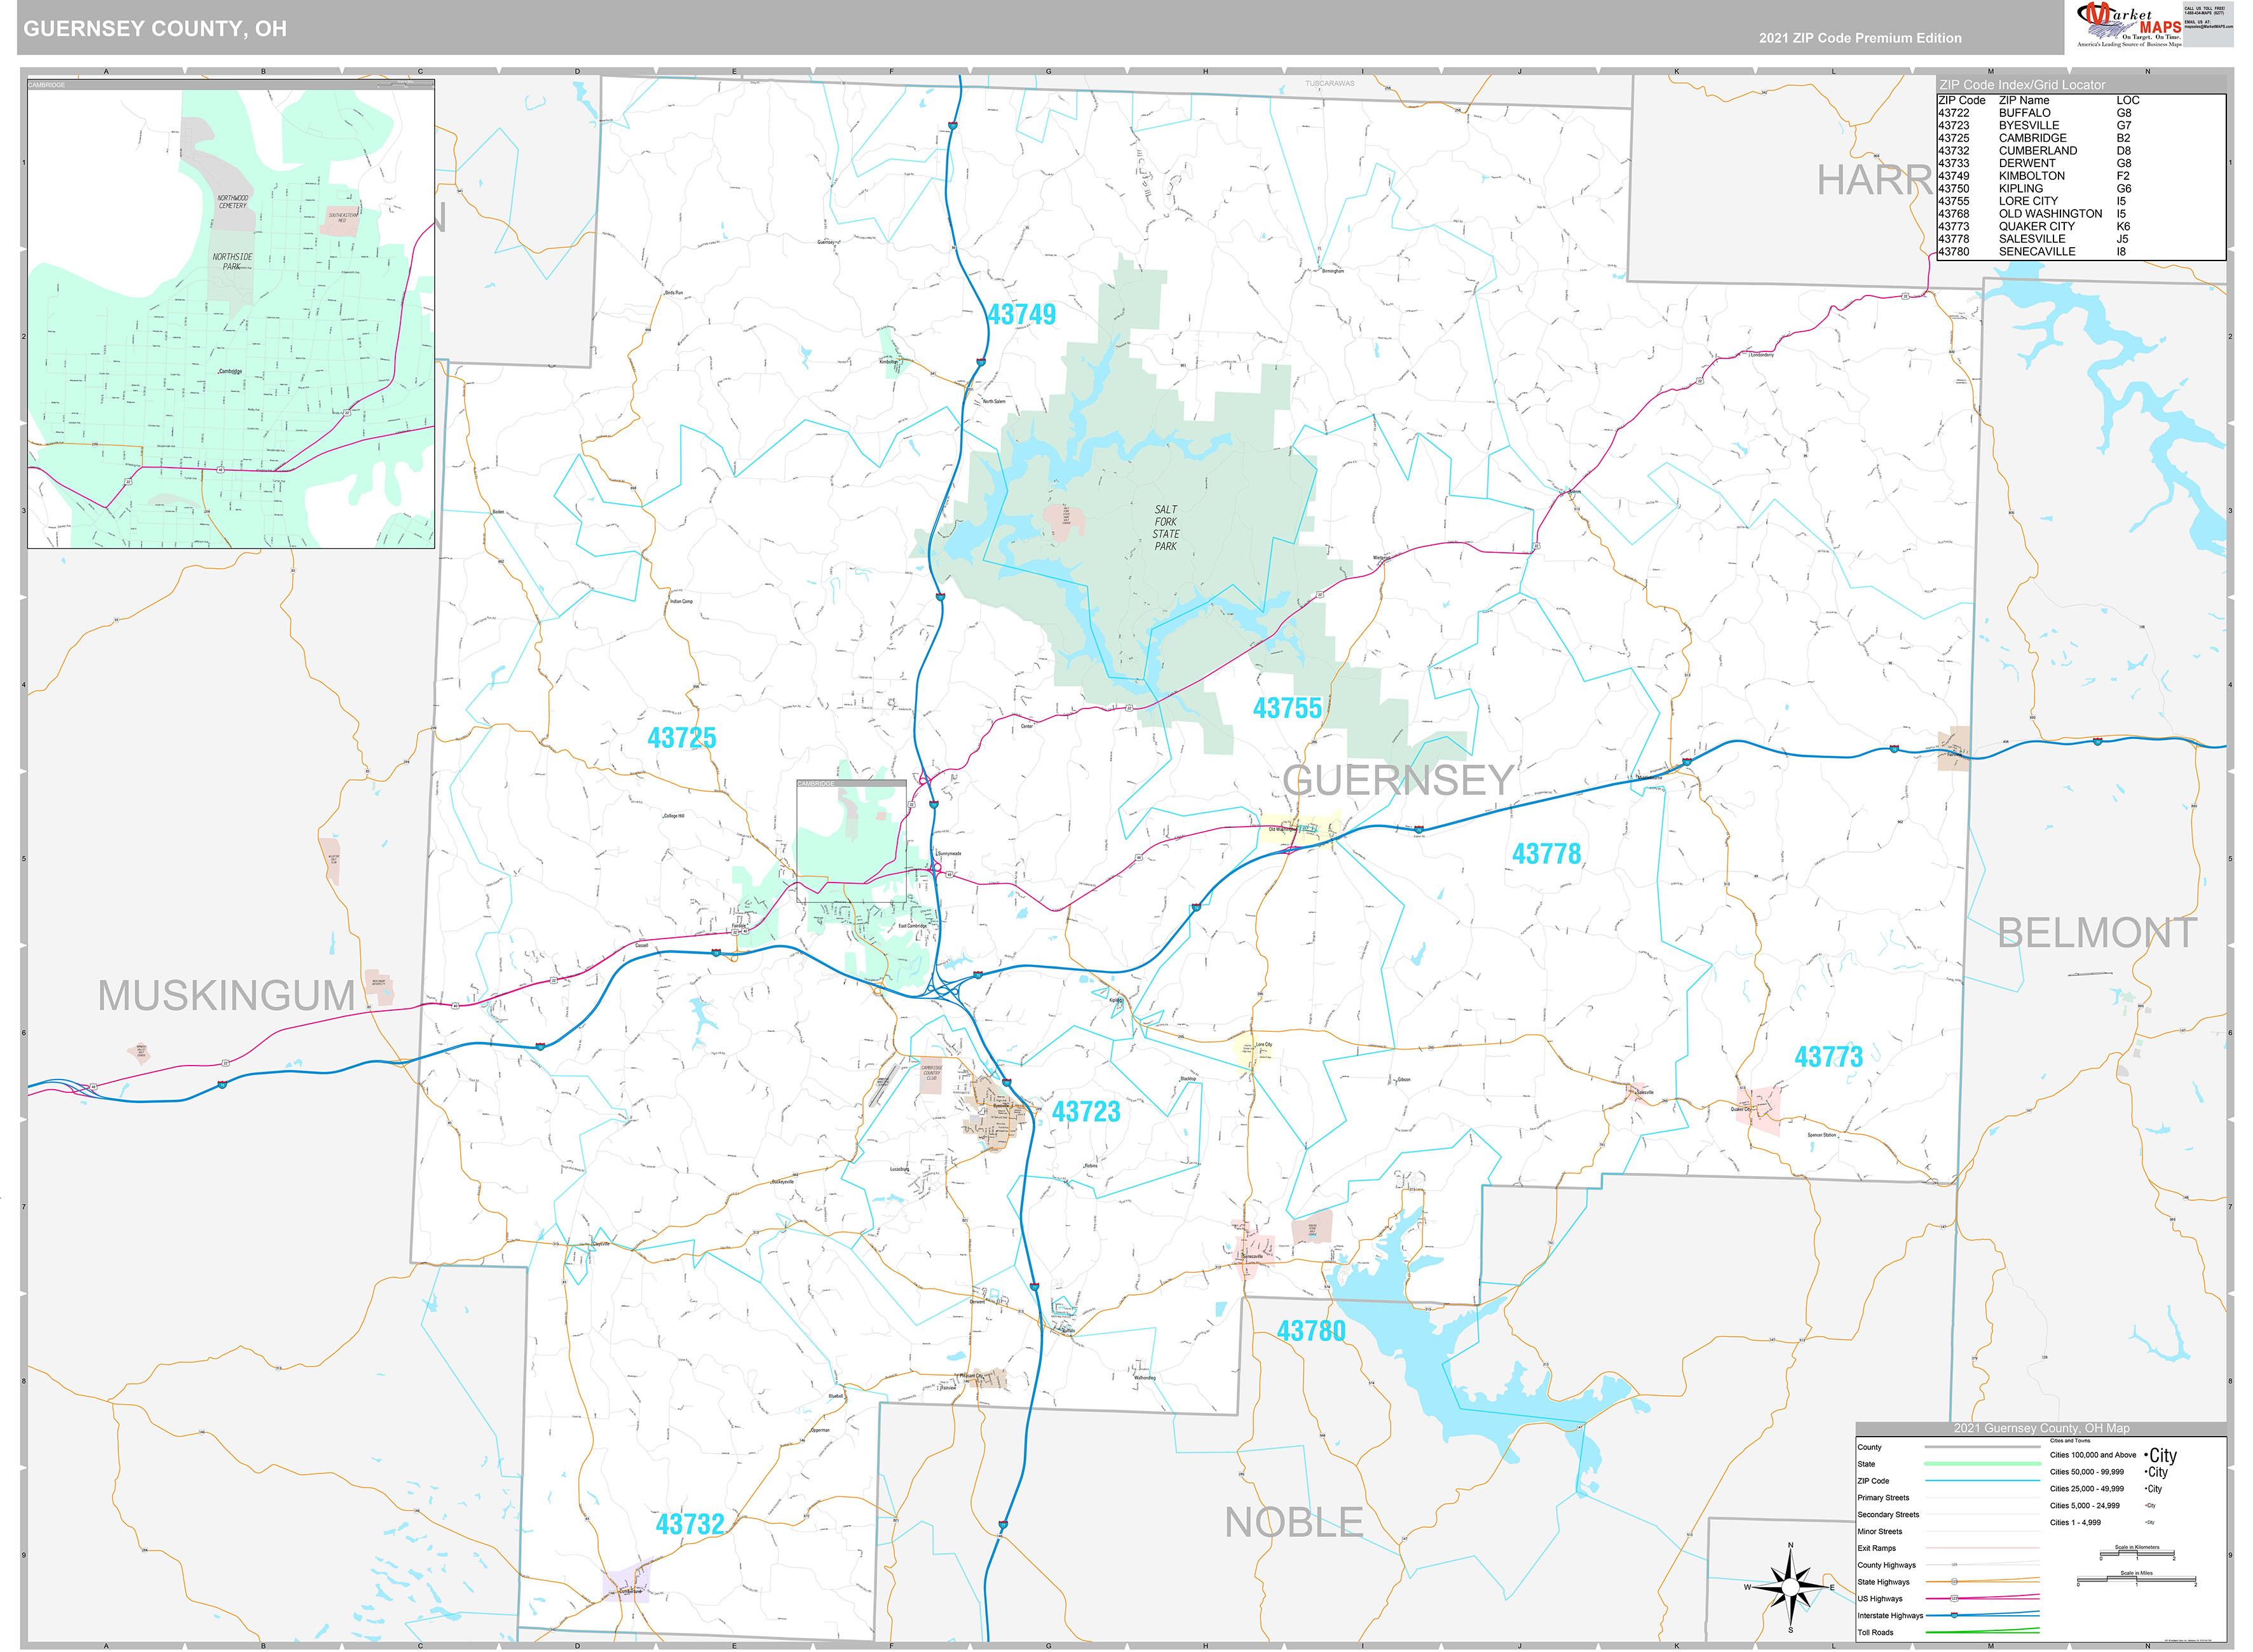 Guernsey County OH Wall Map Premium Style by MarketMAPS